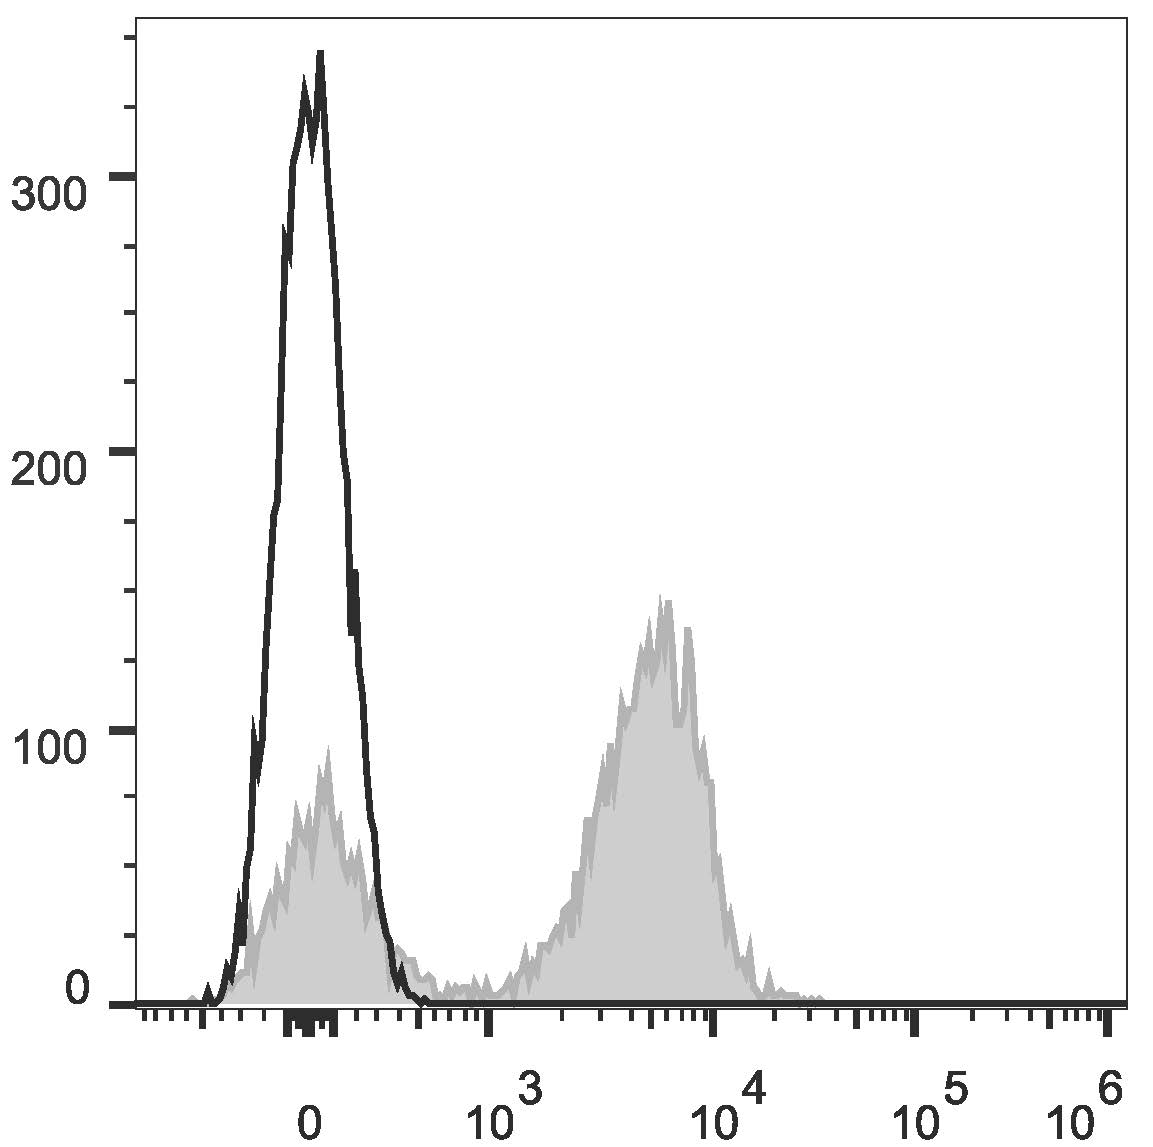 C57BL/6 murine splenocytes are stained with Anti-Mouse CD3ε Monoclonal Antibody(APC Conjugated)[Used at 0.05 μg/10<sup>6</sup> cells dilution](filled gray histogram). Unstained splenocytes (empty black histogram) are used as control.